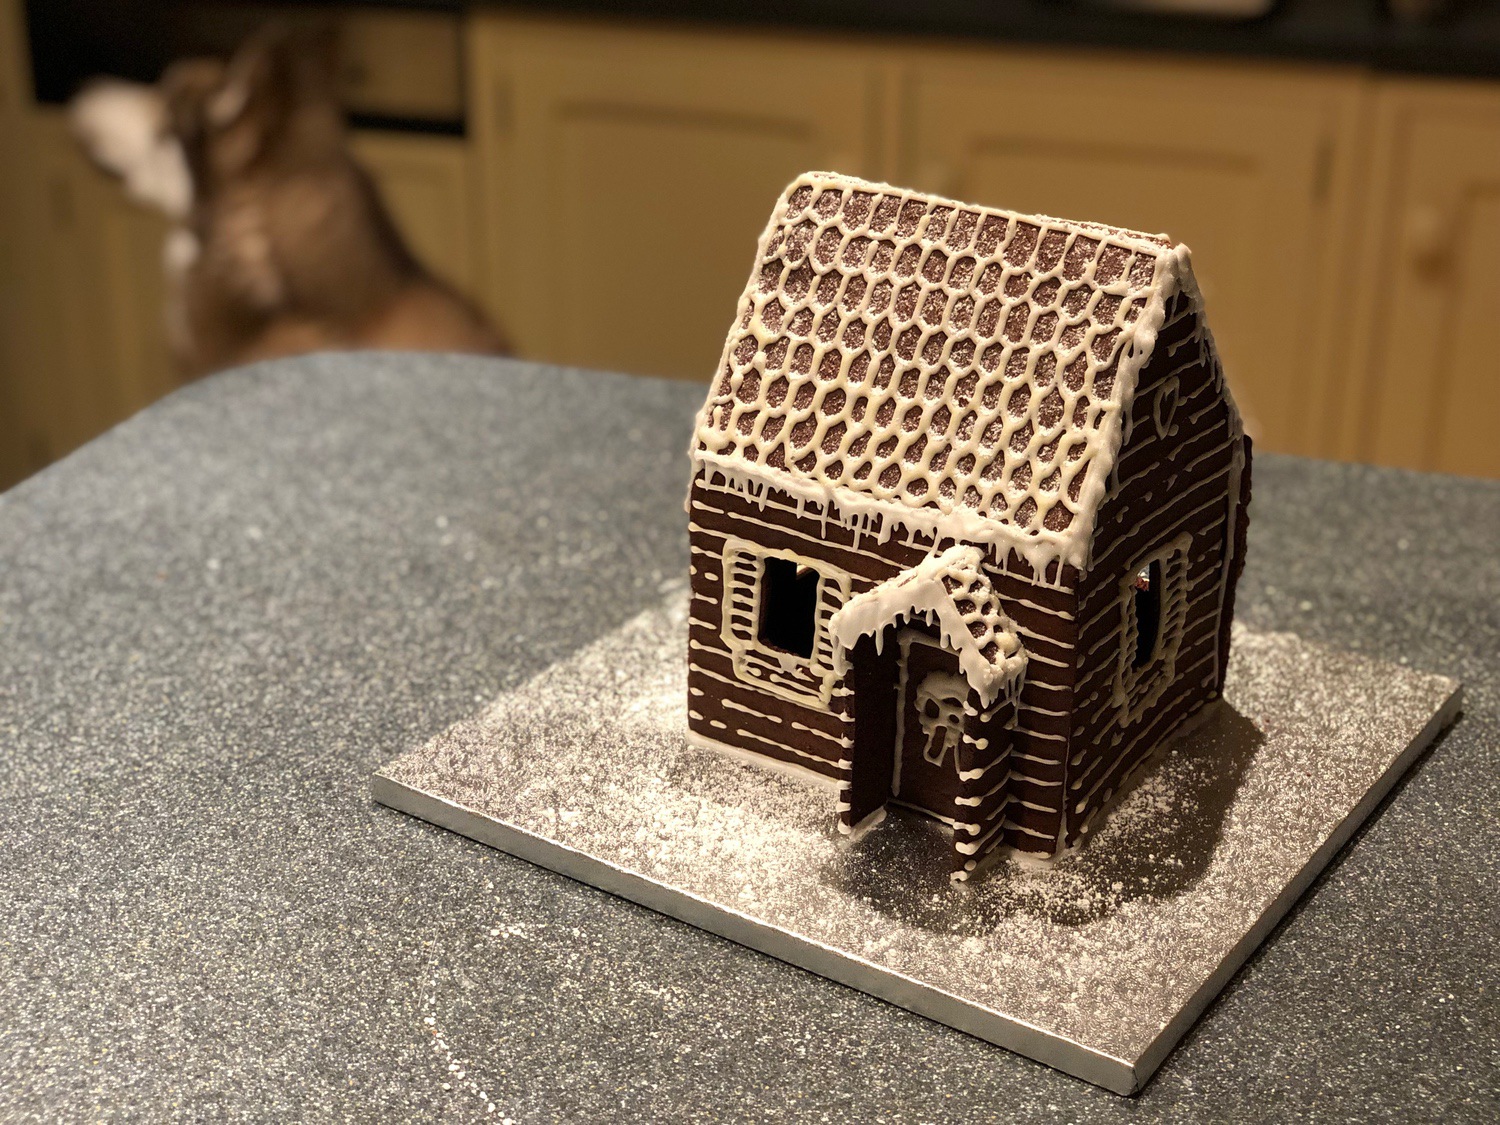 small gingerbread house decorated with icing to look like a log cabin or shack.